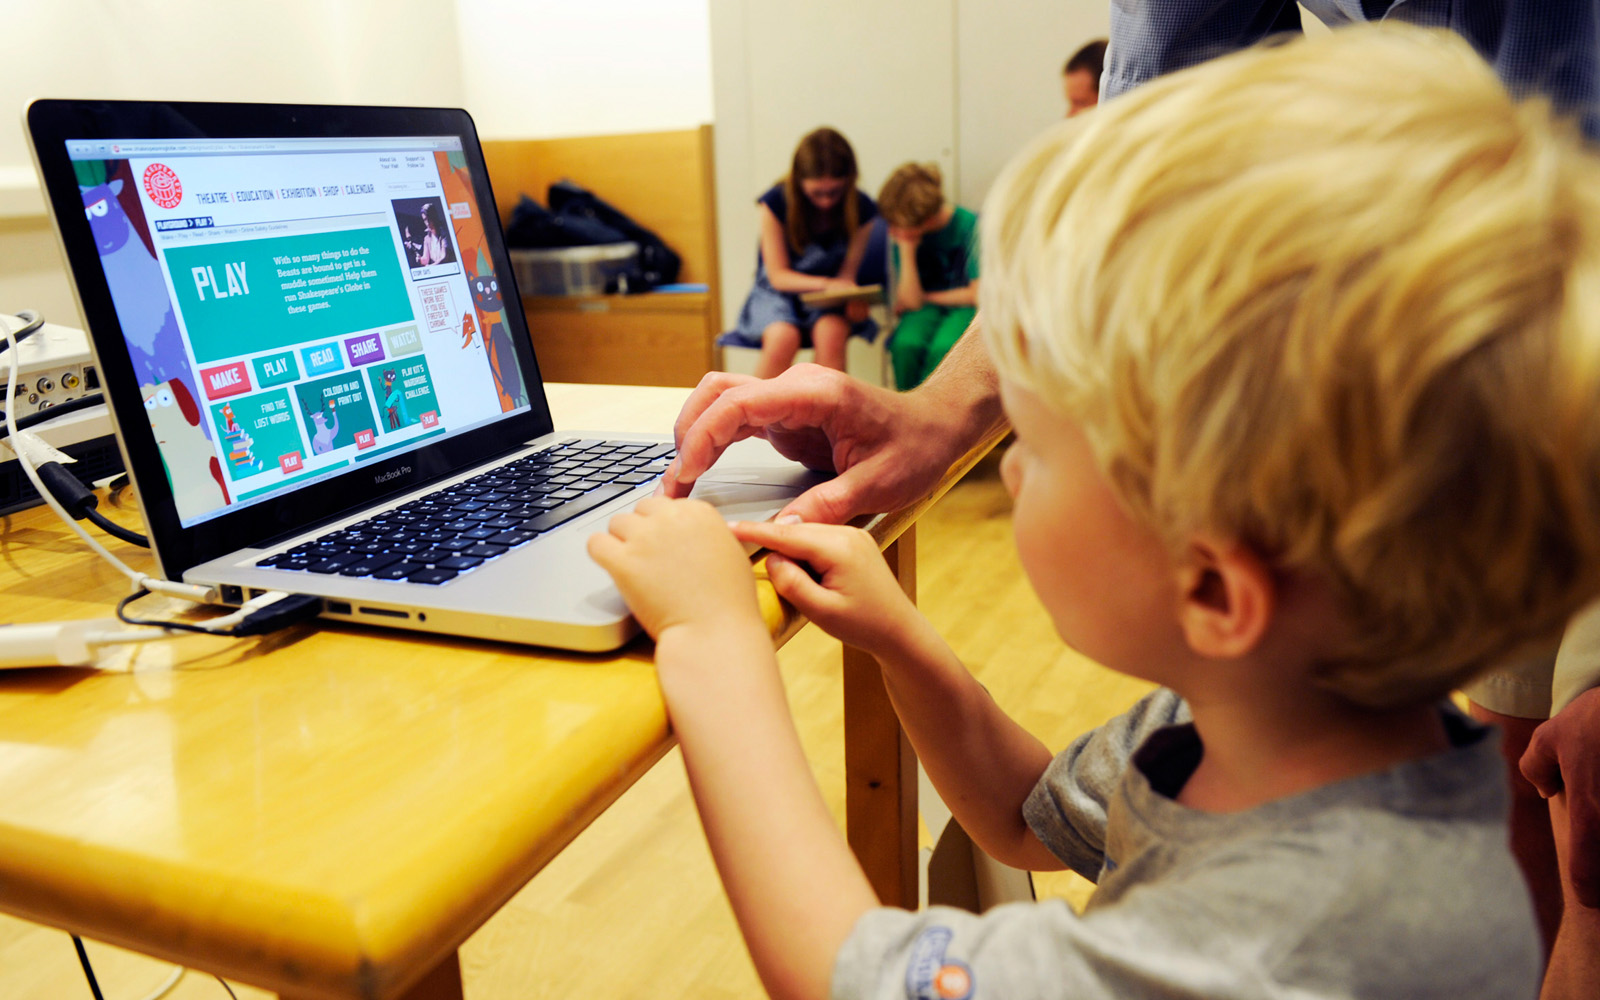 A young boy uses a laptop to browse learning resources